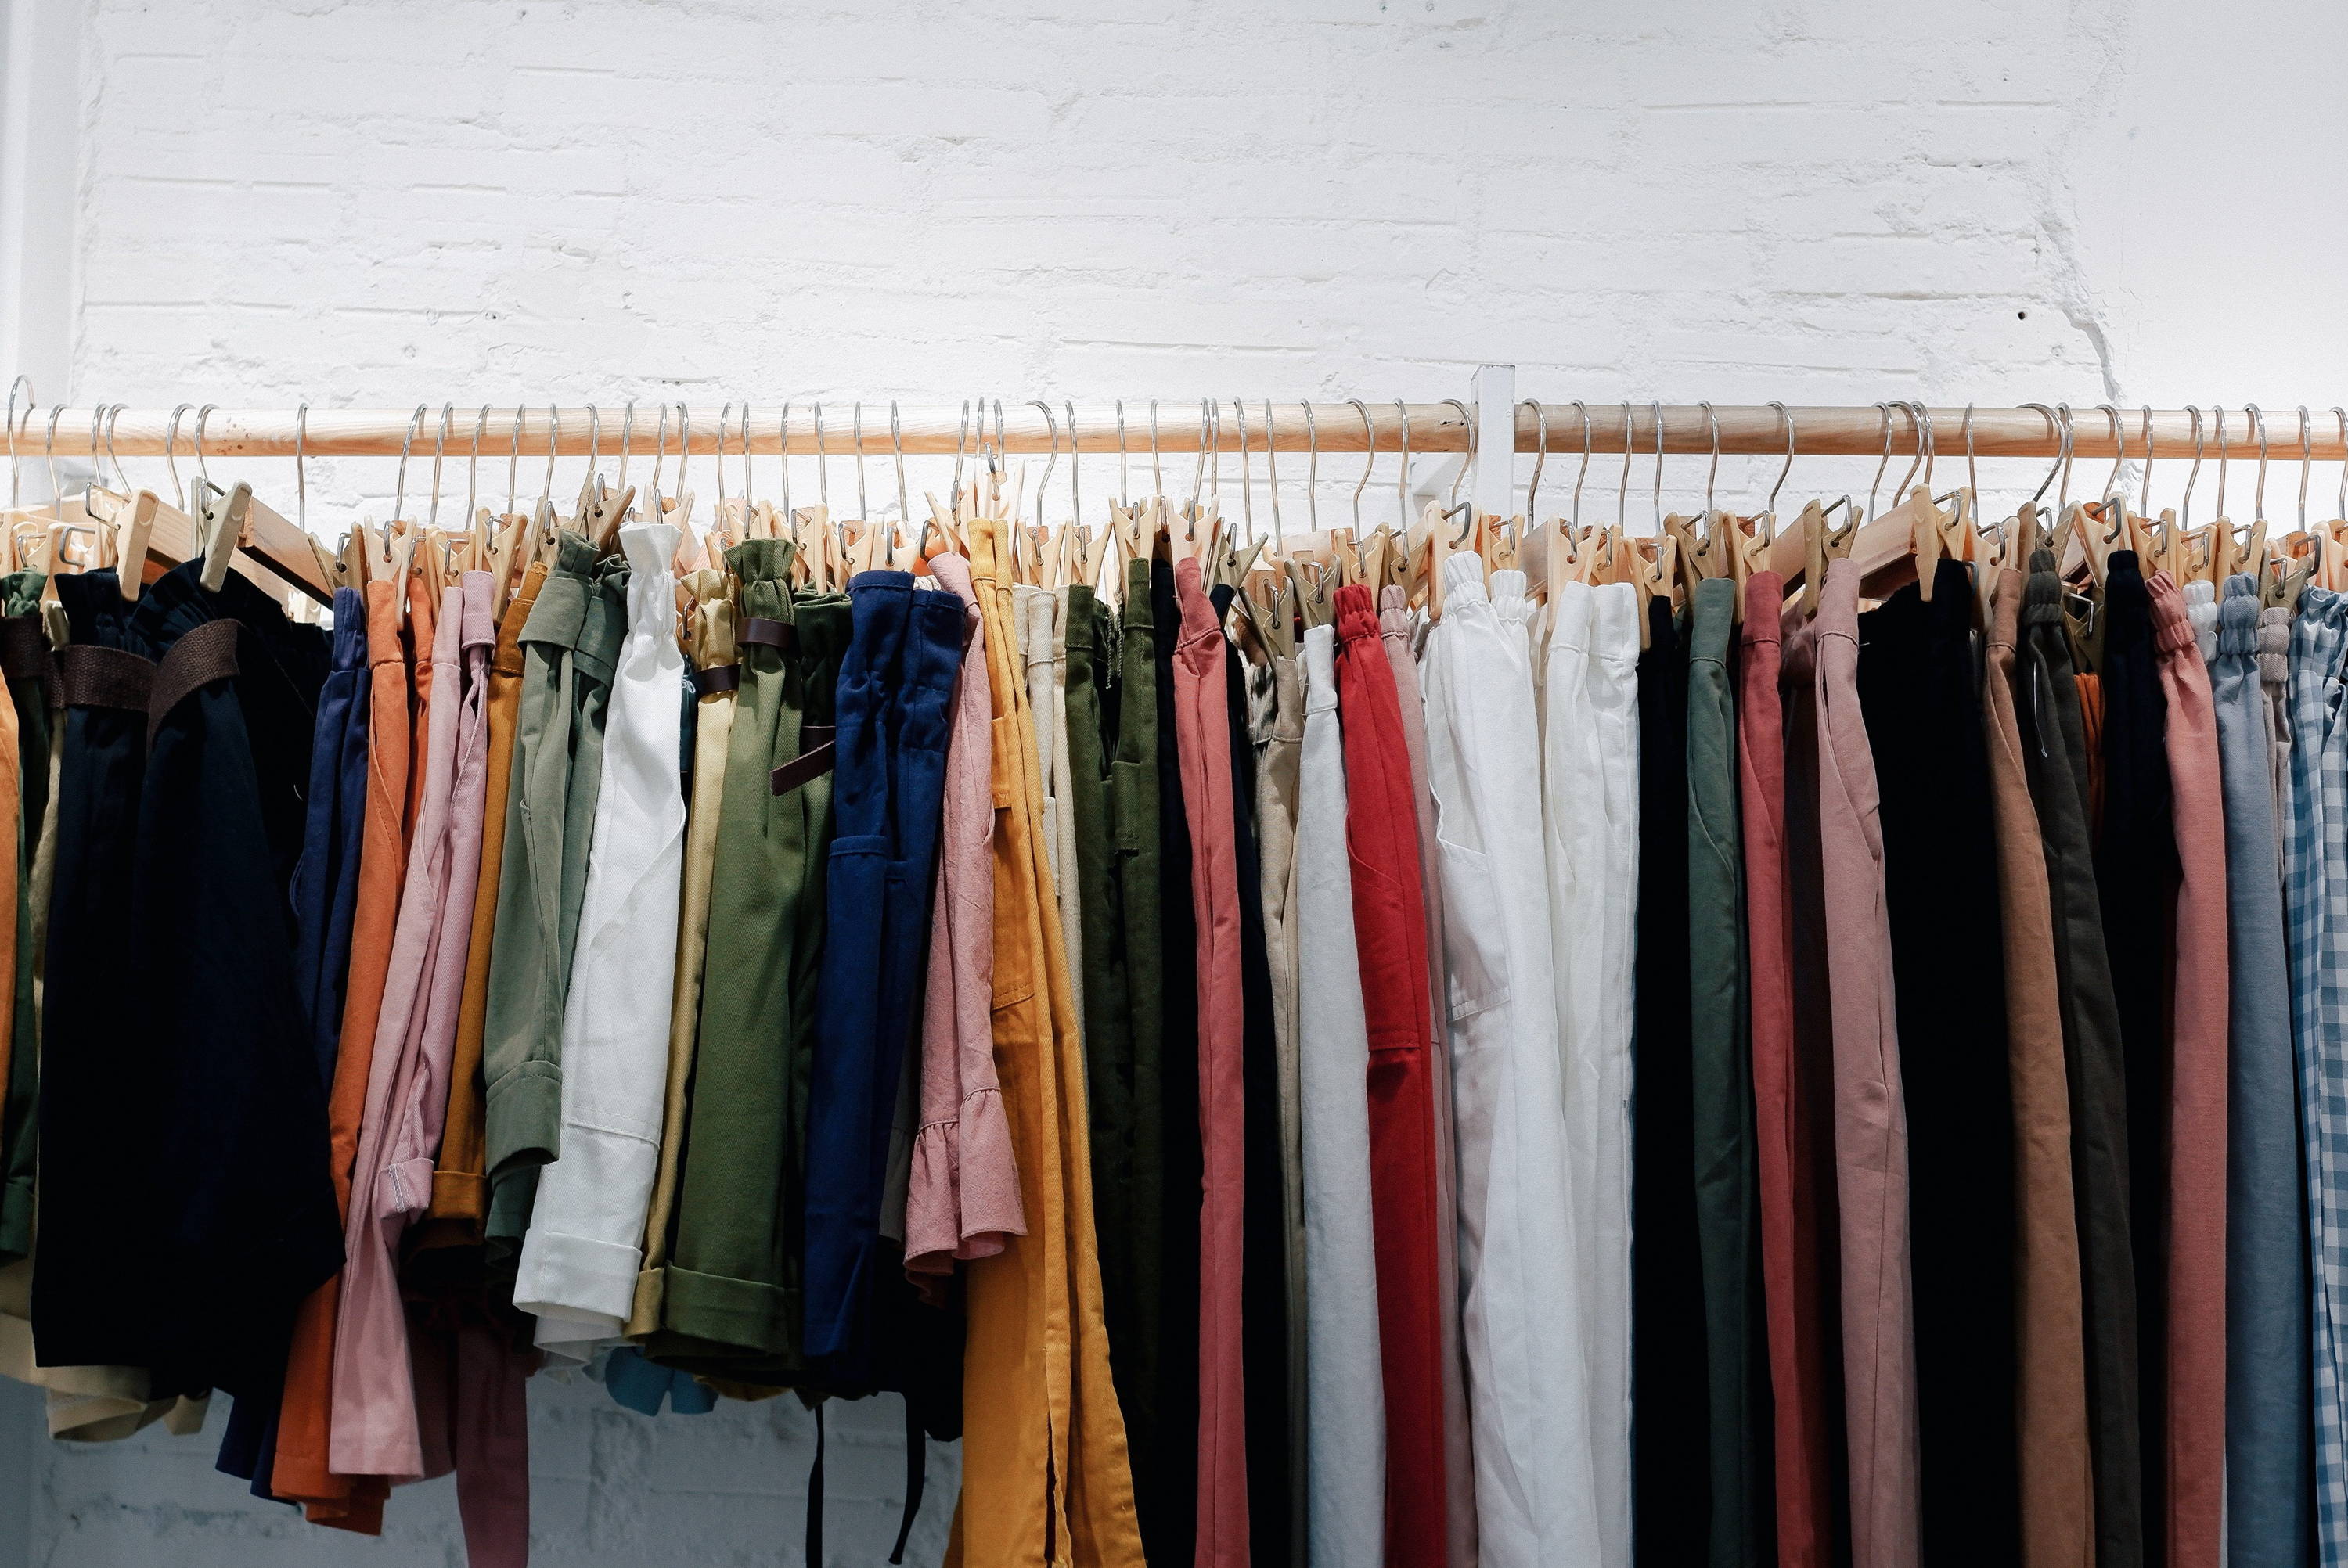 Learn 5 ways to transform your old clothes into new items.